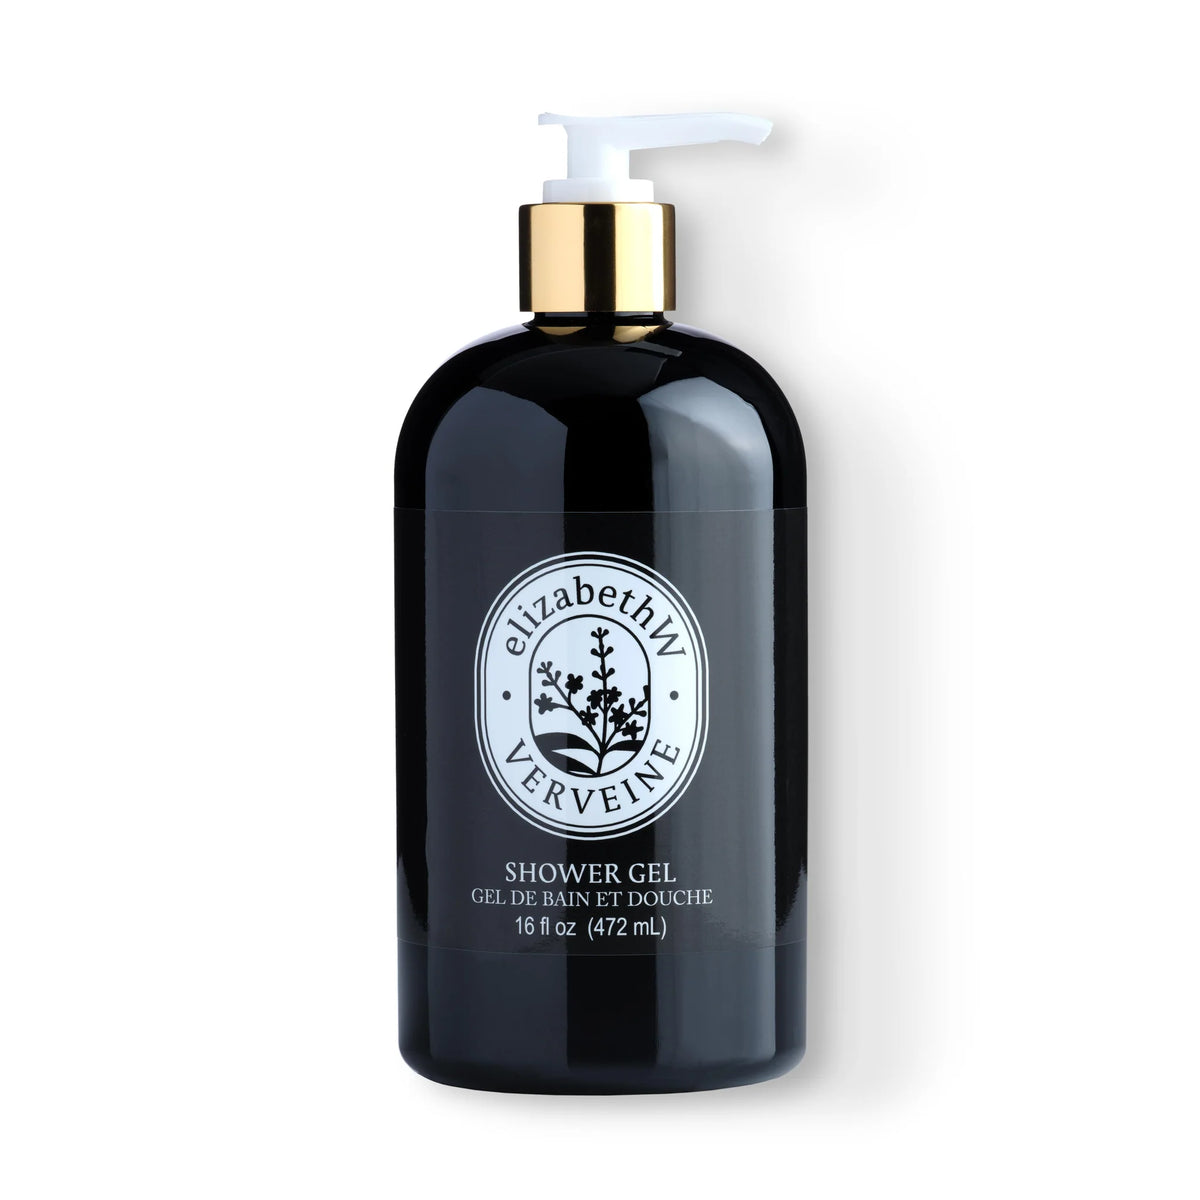 A dark amber bottle of elizabeth W Atelier Verveine Bath & Shower Gel - 16 oz with a white pump, displayed against a white background. The label features elegant black and white typography and a botanical illustration.